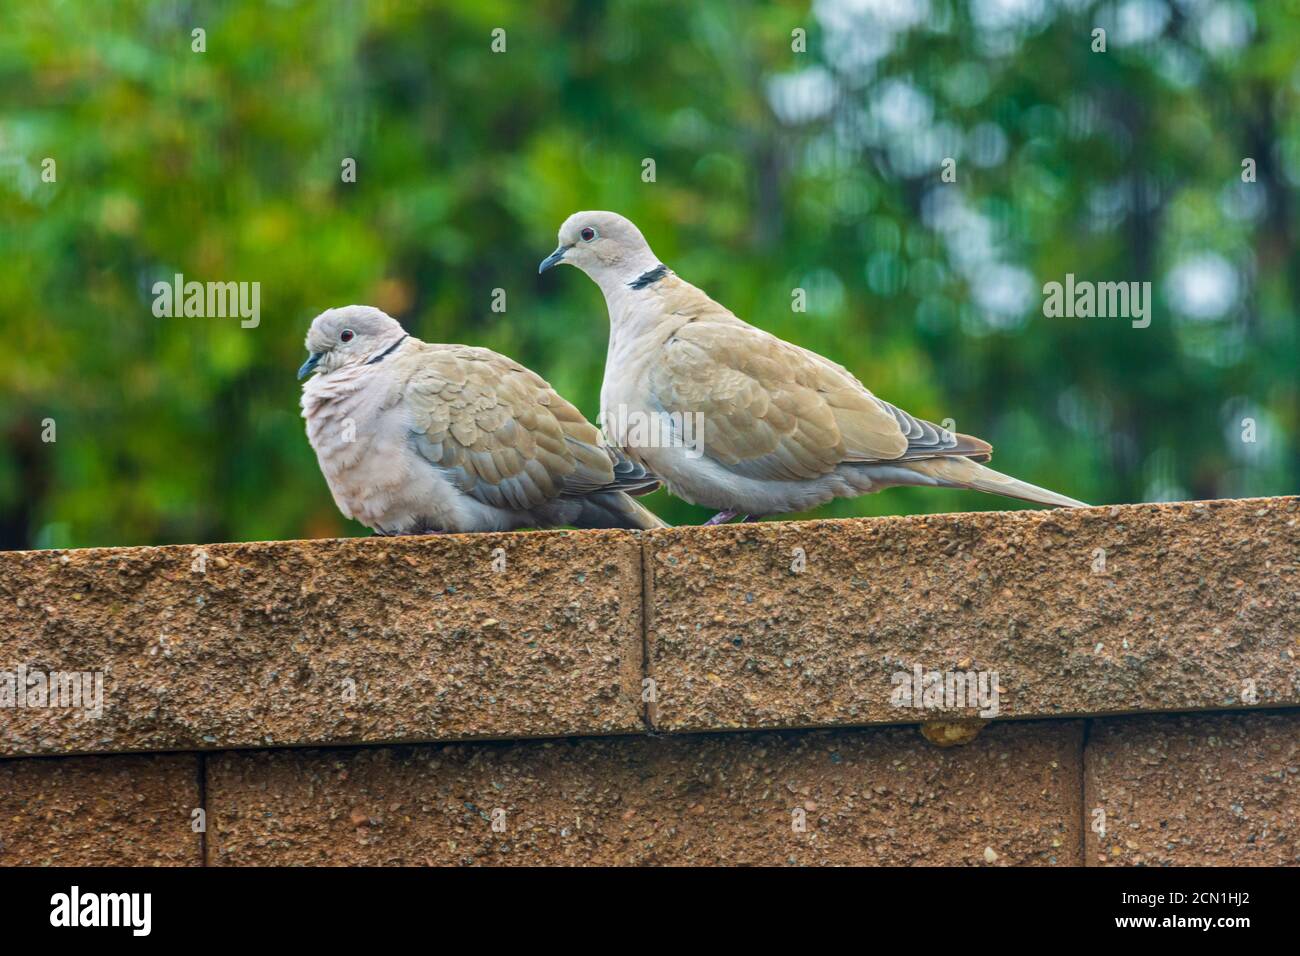 Eurasian Collared Doves (Streptopelia decaocto), Castle Rock Colorado USA. A successful envasive species introduced to North America from Asia. Stock Photo